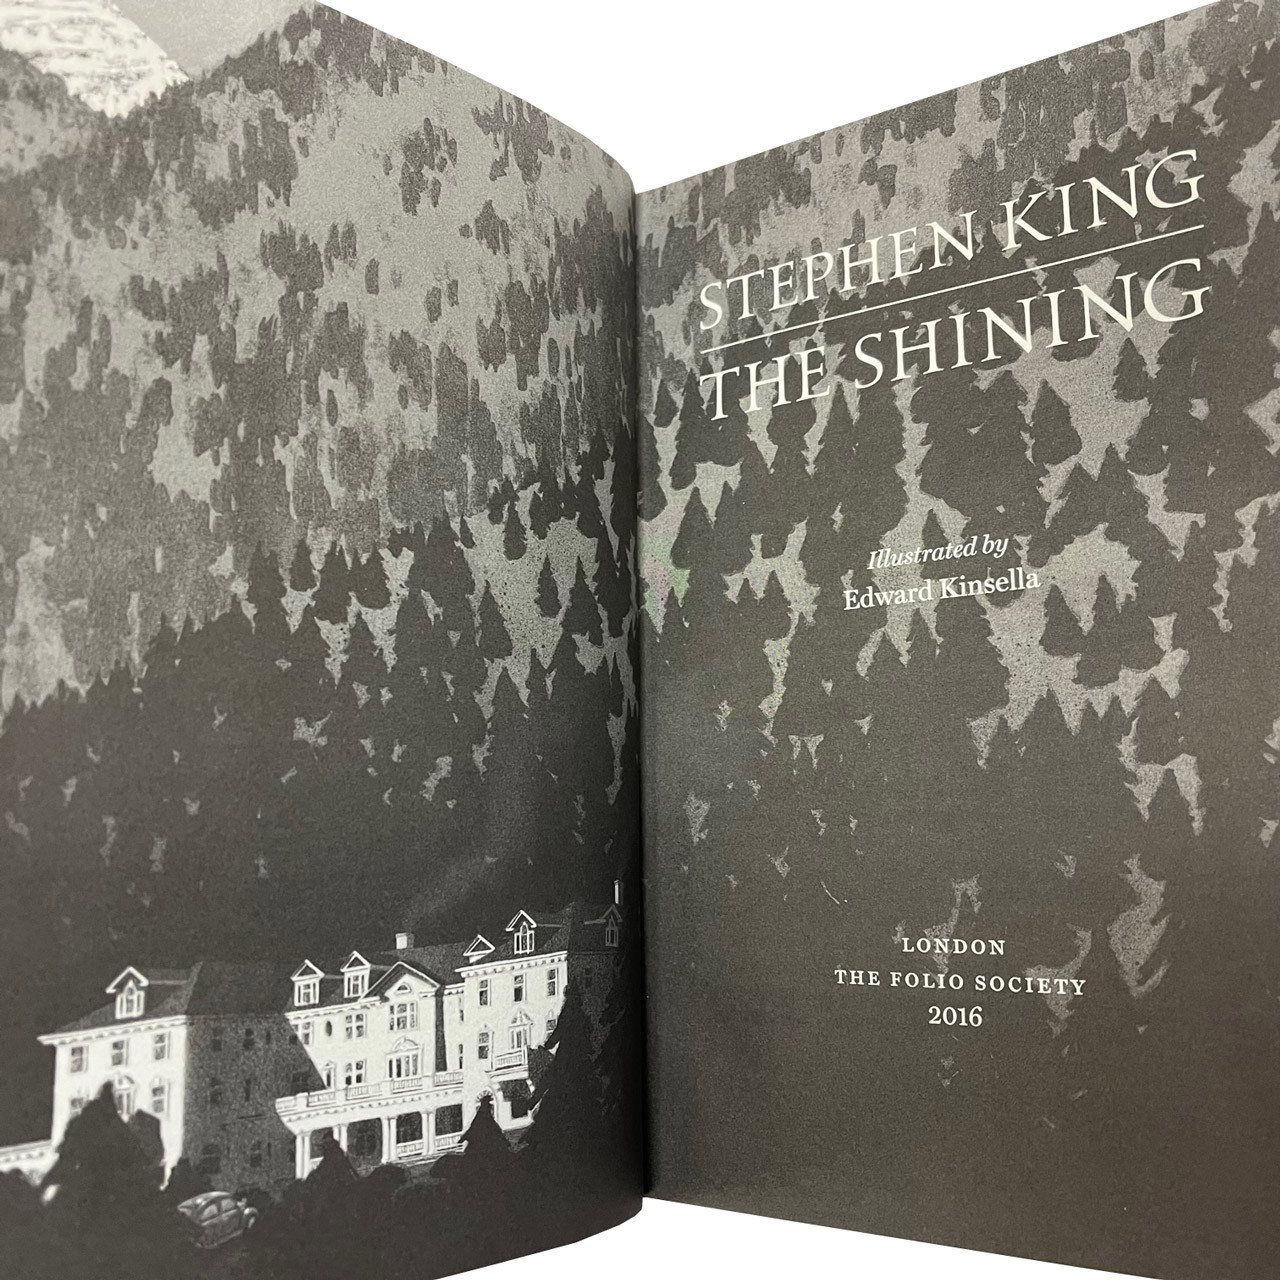 Stephen King "The Shining" Slipcased Deluxe Limited First Edition, Remarqued by Glenn Chadbourne